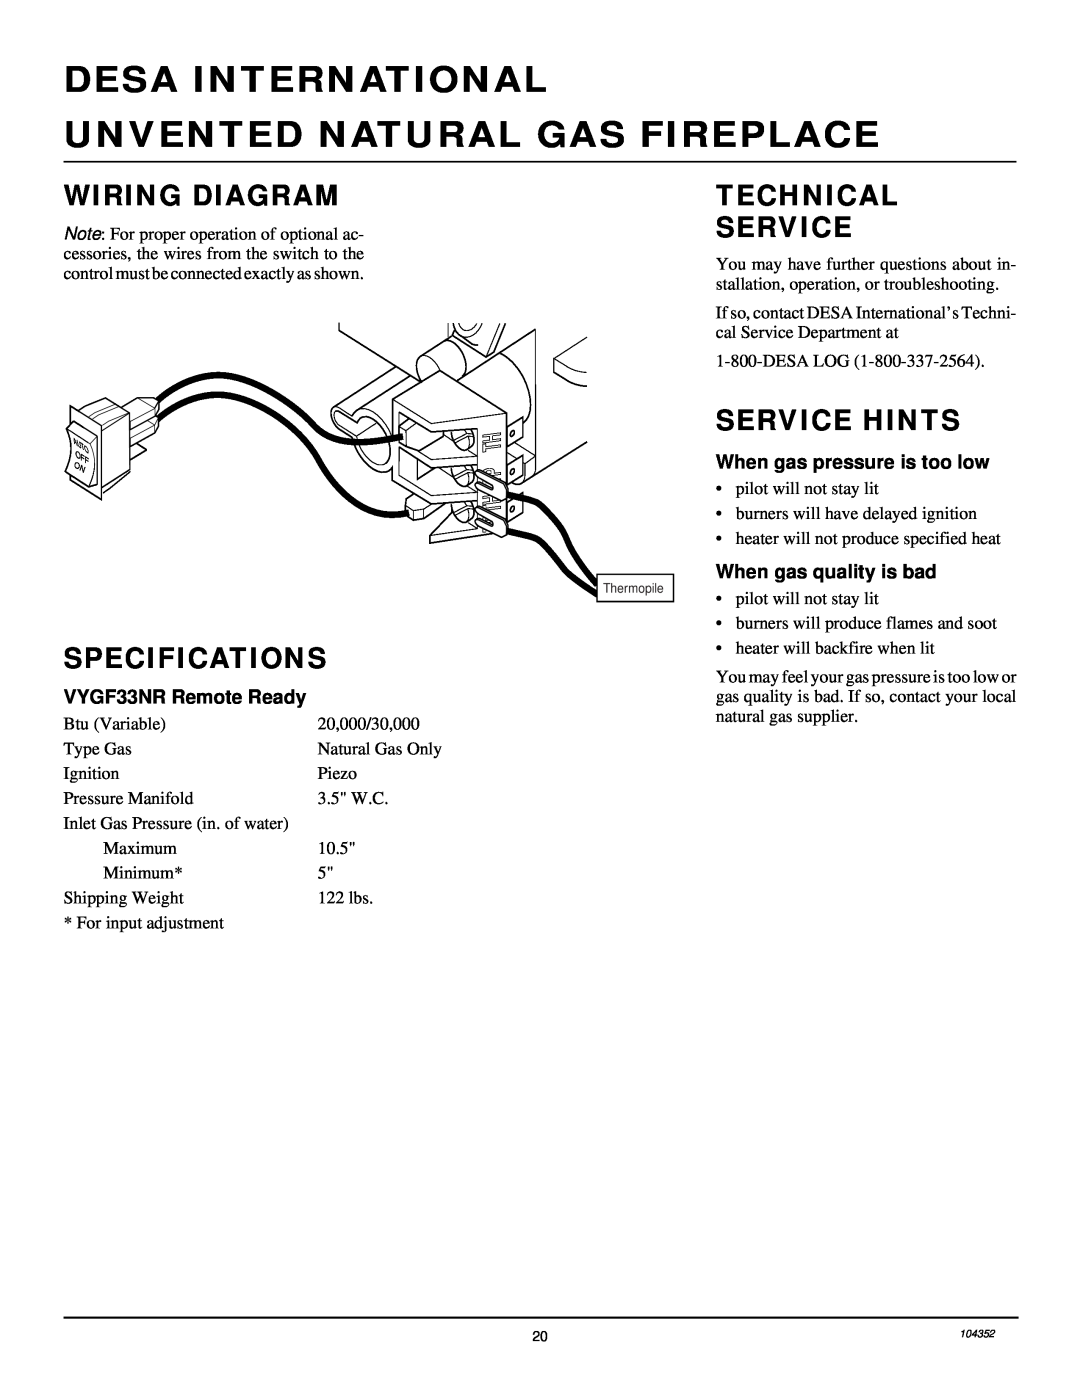 Desa VYGF33NR installation manual Wiring Diagram, Specifications, Technical Service, Service Hints 